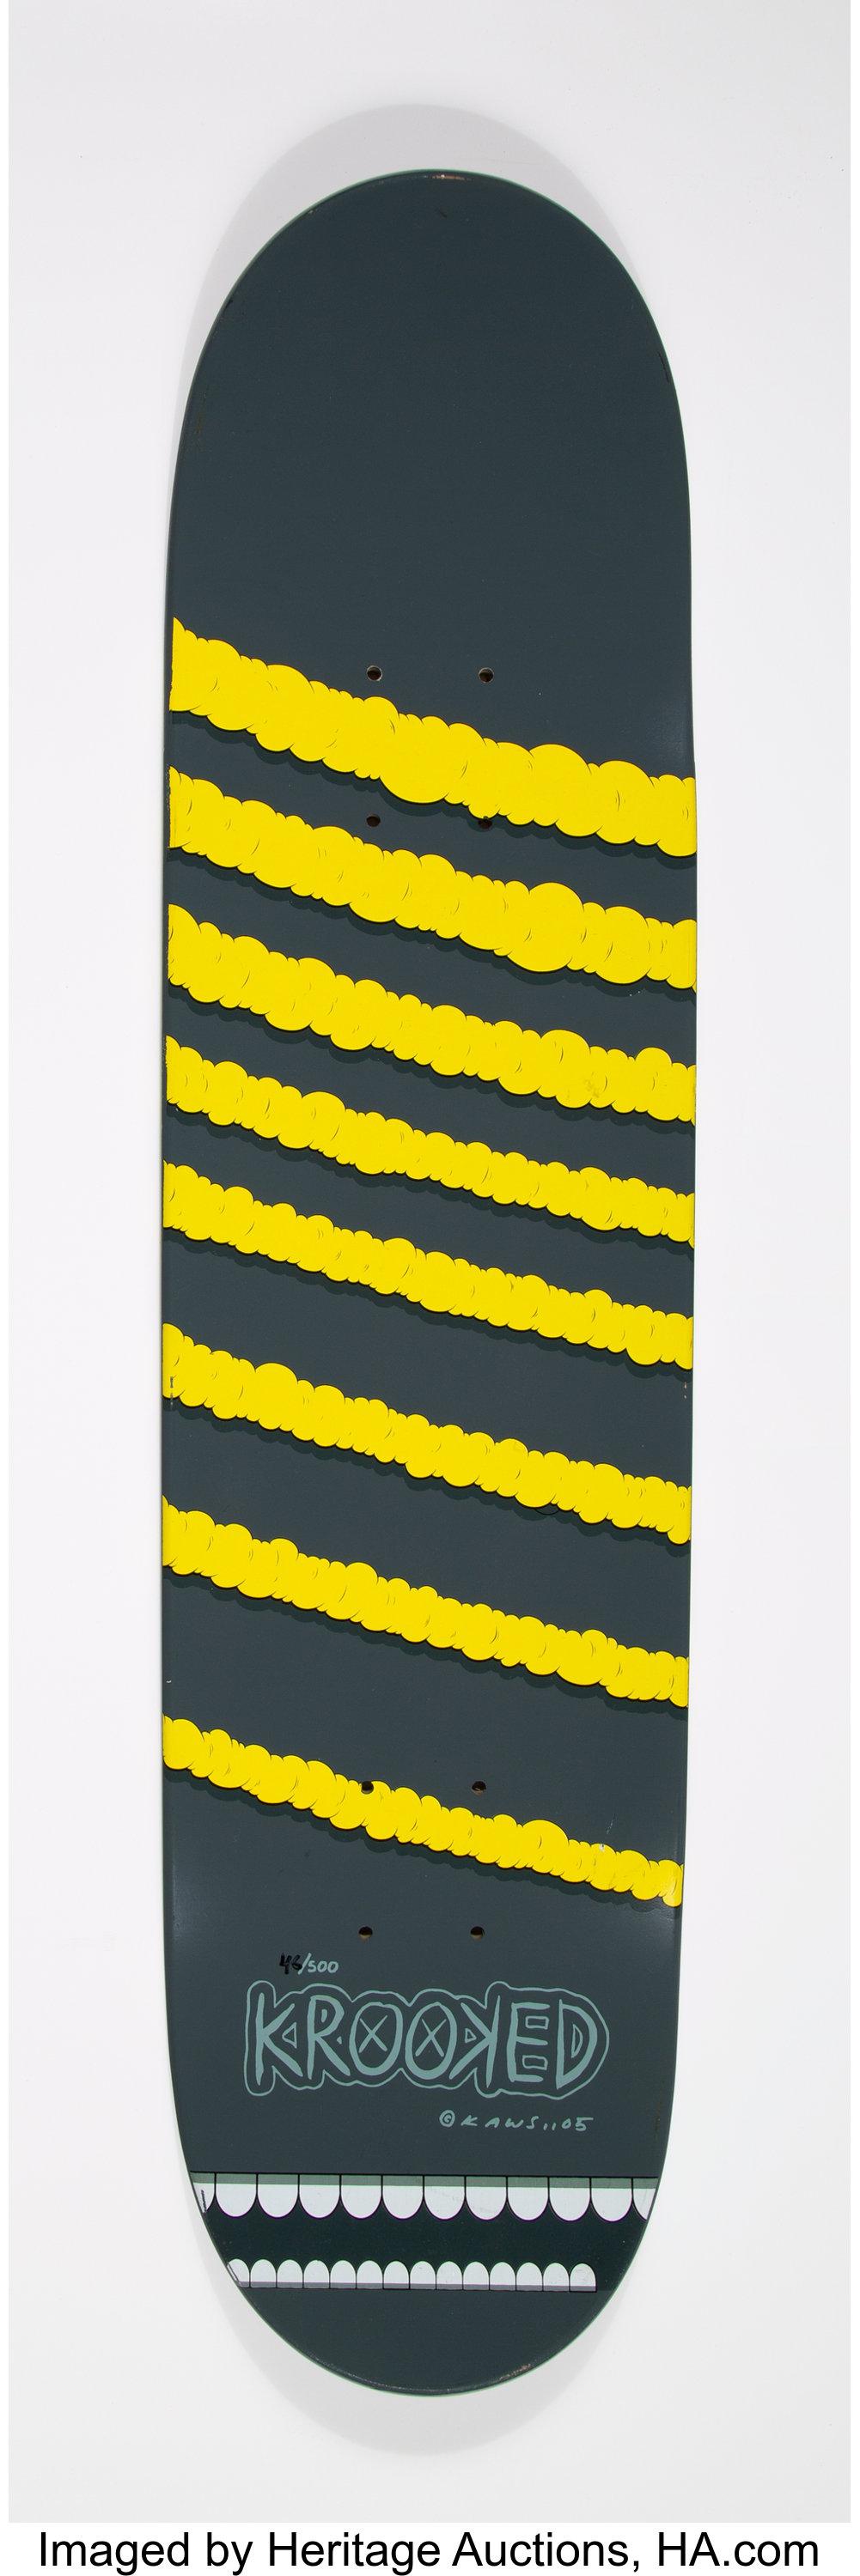 KAWS
Yellow Snake, 2005
Silkscreen on 100% Canadian 7-Ply Maplewood Skateboard
31 × 8 × 3/10 inches
Limited Edition of 500 (skate deck is hand numbered 46/500)
Rare limited edition early KAWS piece from 2005.  Collectors item!
Signed and dated on